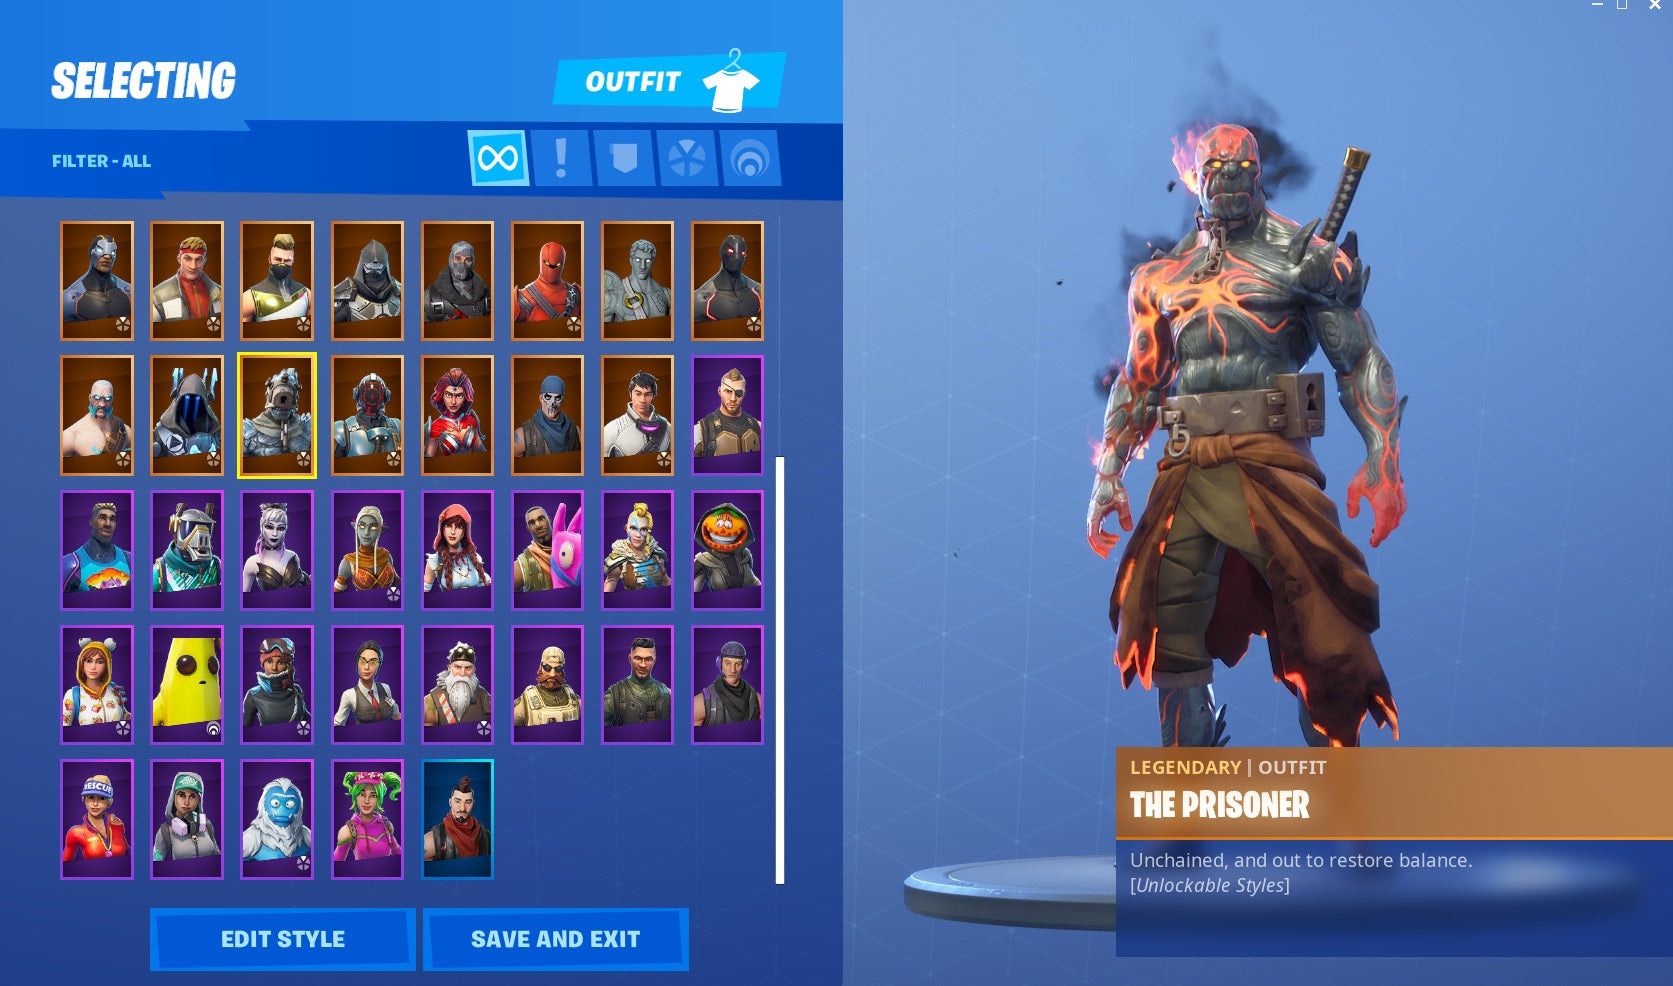 ⚡59 Outfits! 💎Love Ranger! 💎Red Knight! 💎The Ice King! 💎A.I.M.! ⚡49 Backs! ⚡StW: 205 lvl! ⚡8x Pets! NO.8